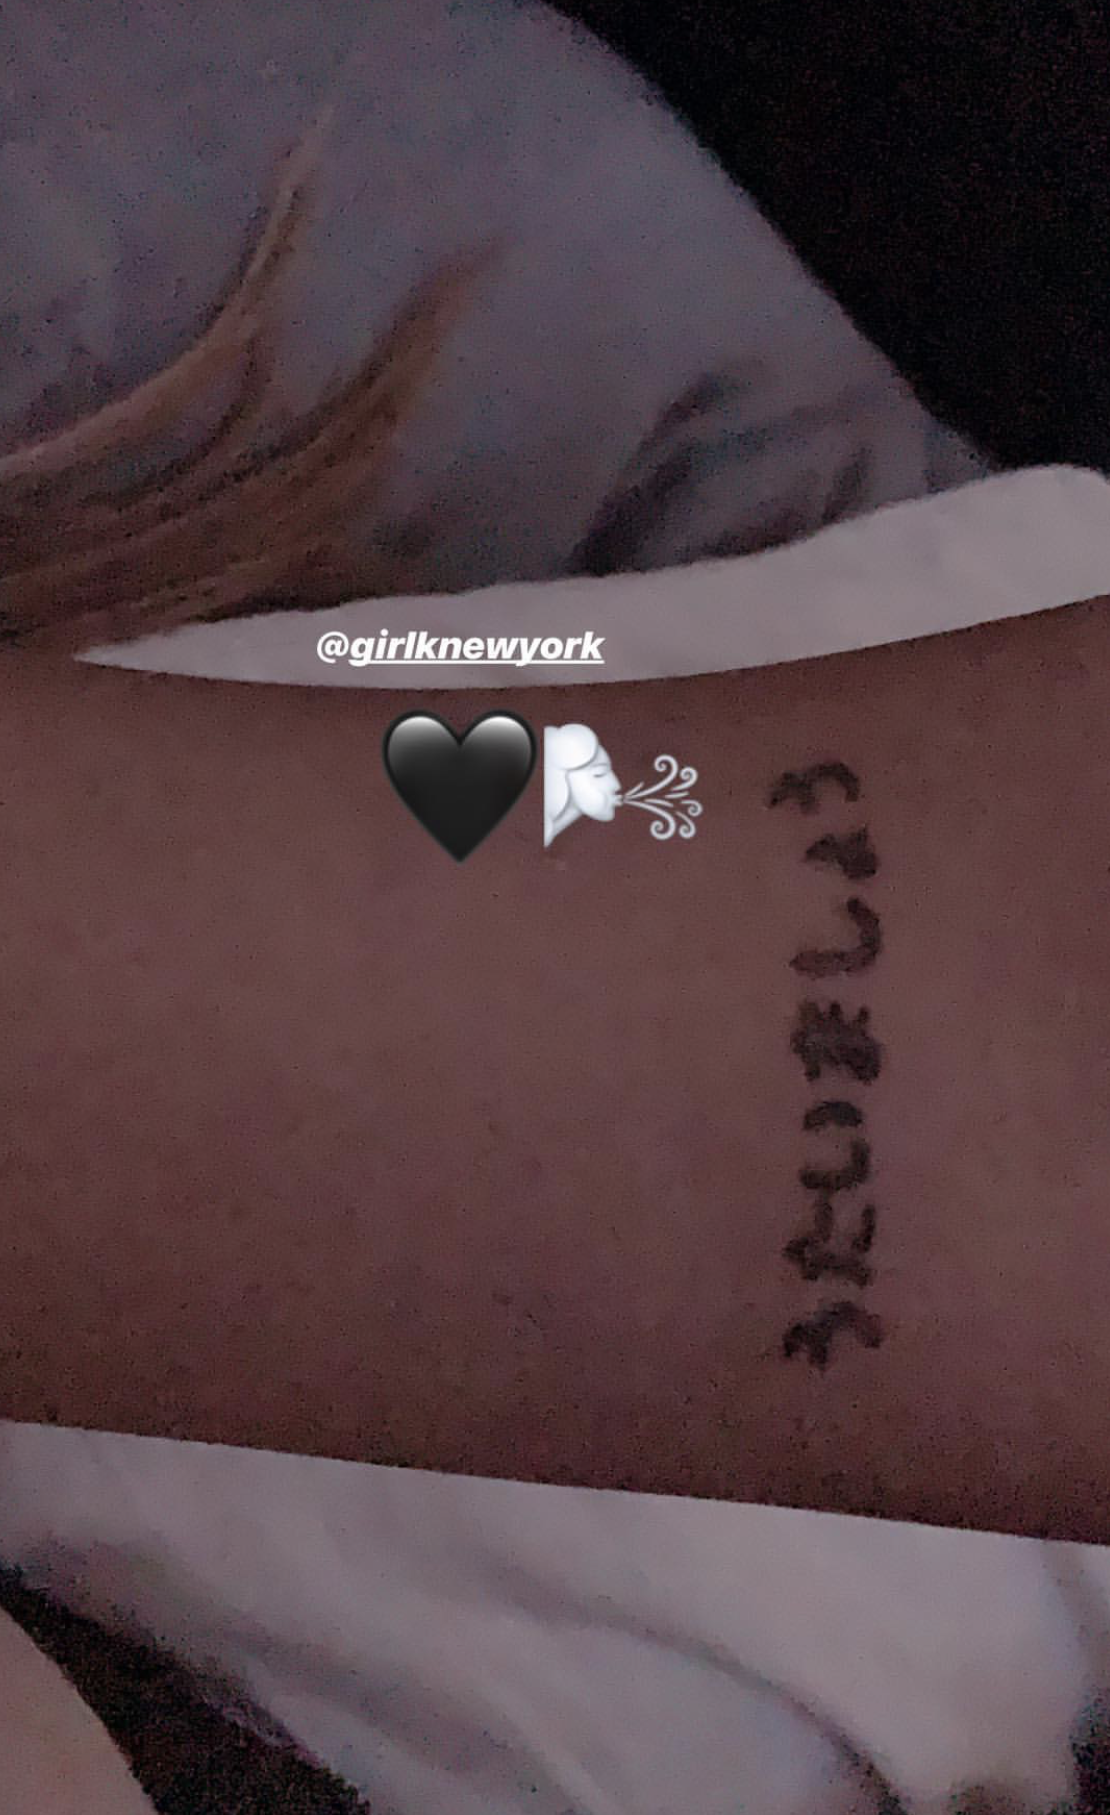 This May Be Ariana Grande's Most Ridiculous Tattoo